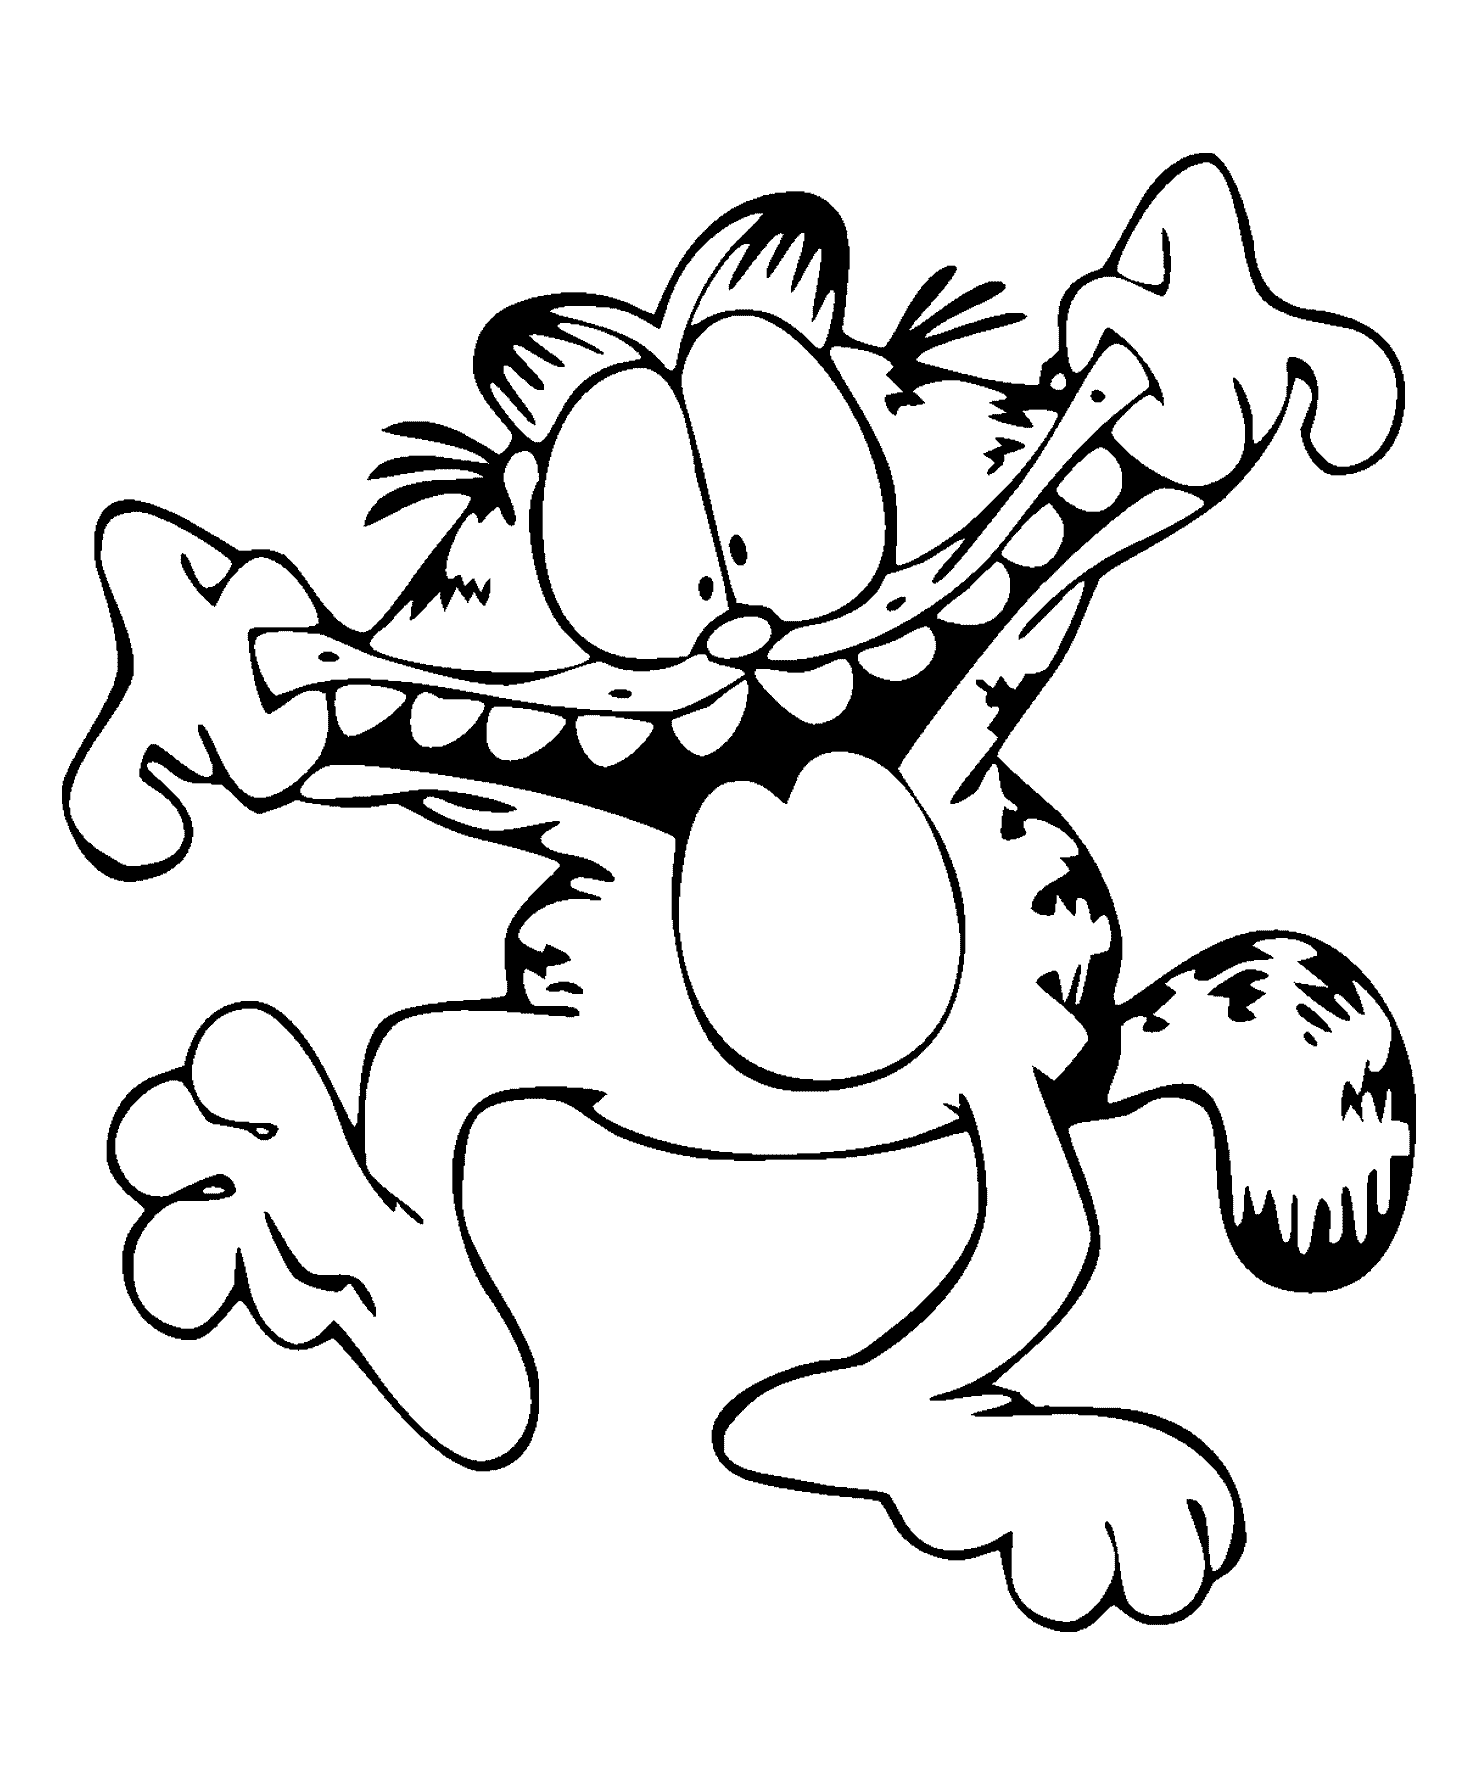 Funny Garfield coloring pages for kids printable free | coloing-